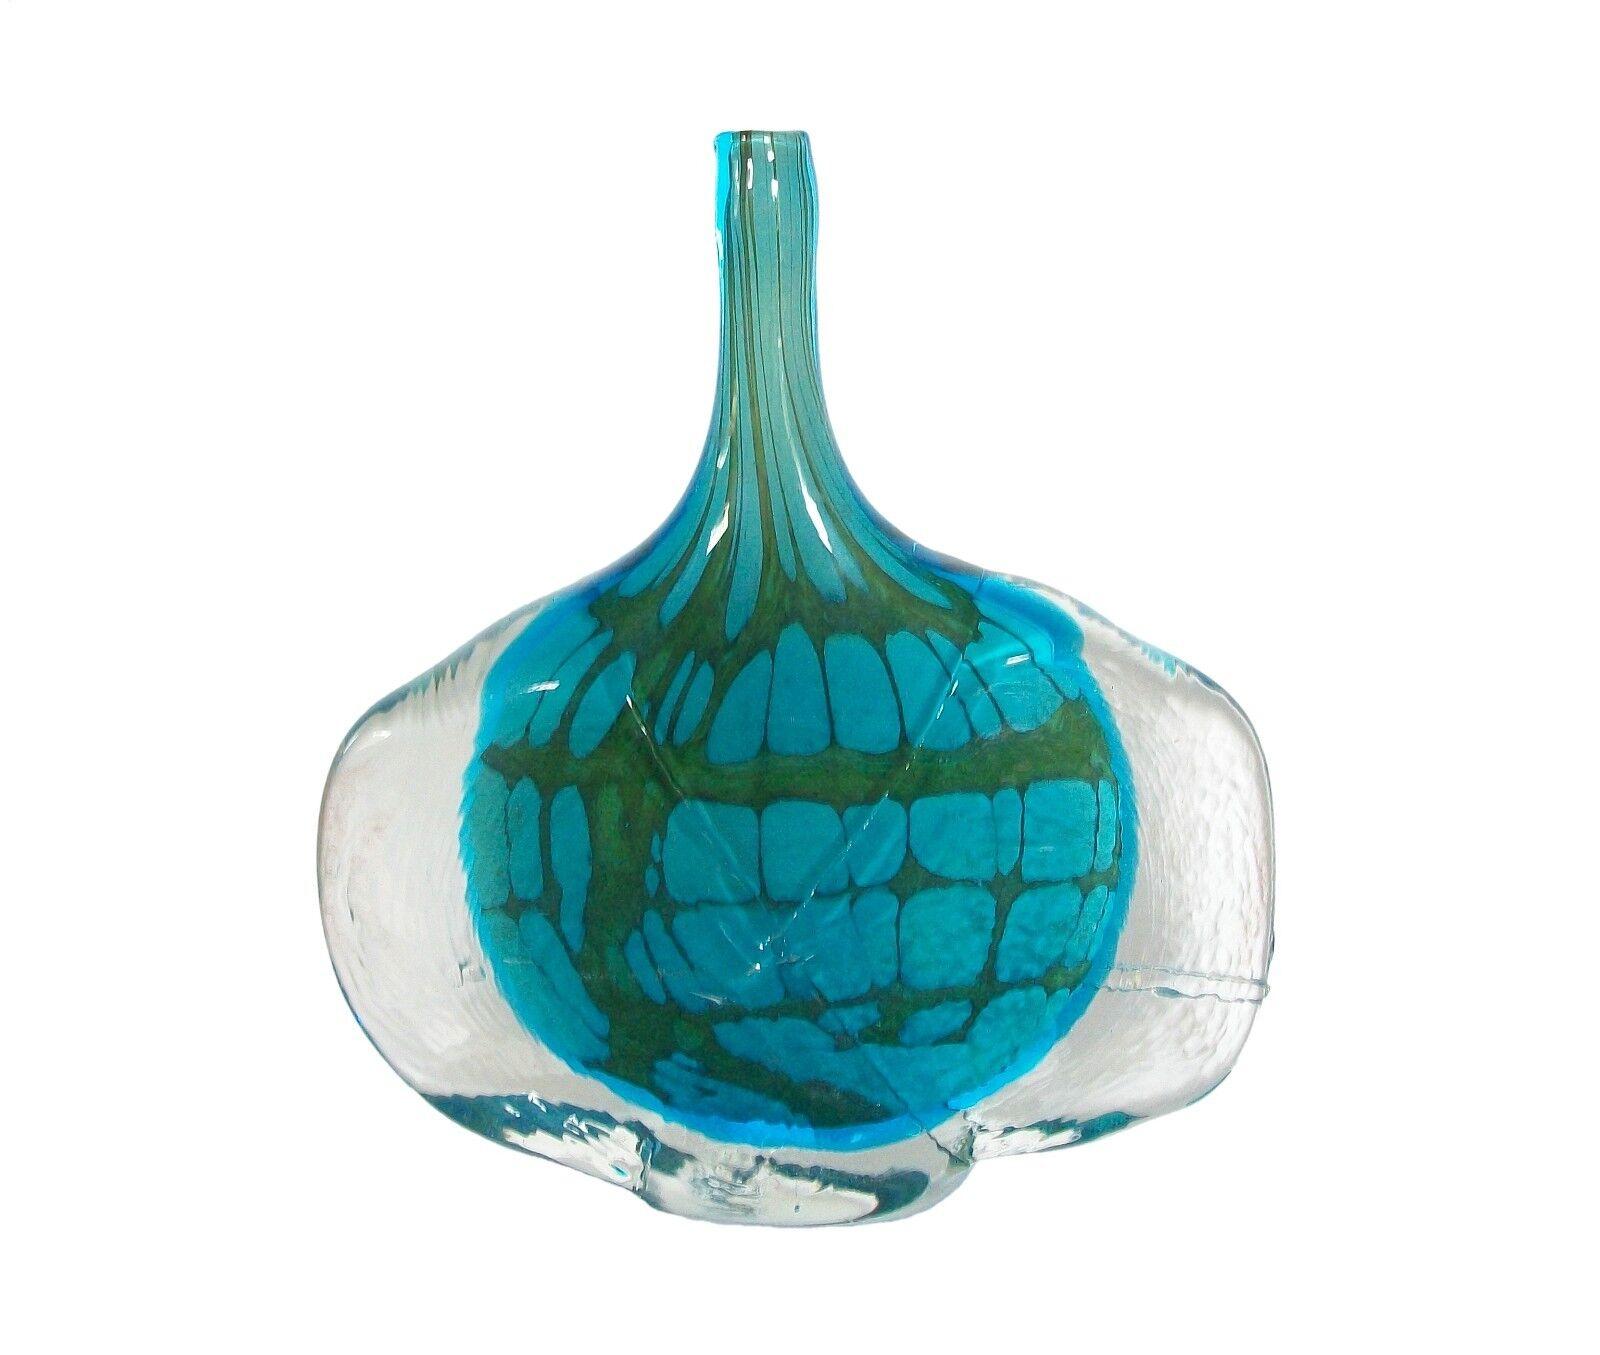 MDINA GLASS or MDG After Designs by Michael Harris - extraordinary mid-century studio glass 'Fish' vase - striking turquoise and green internal fused glass with an unusual square design - textured finish to the outer clear shell - unsigned - Malta -